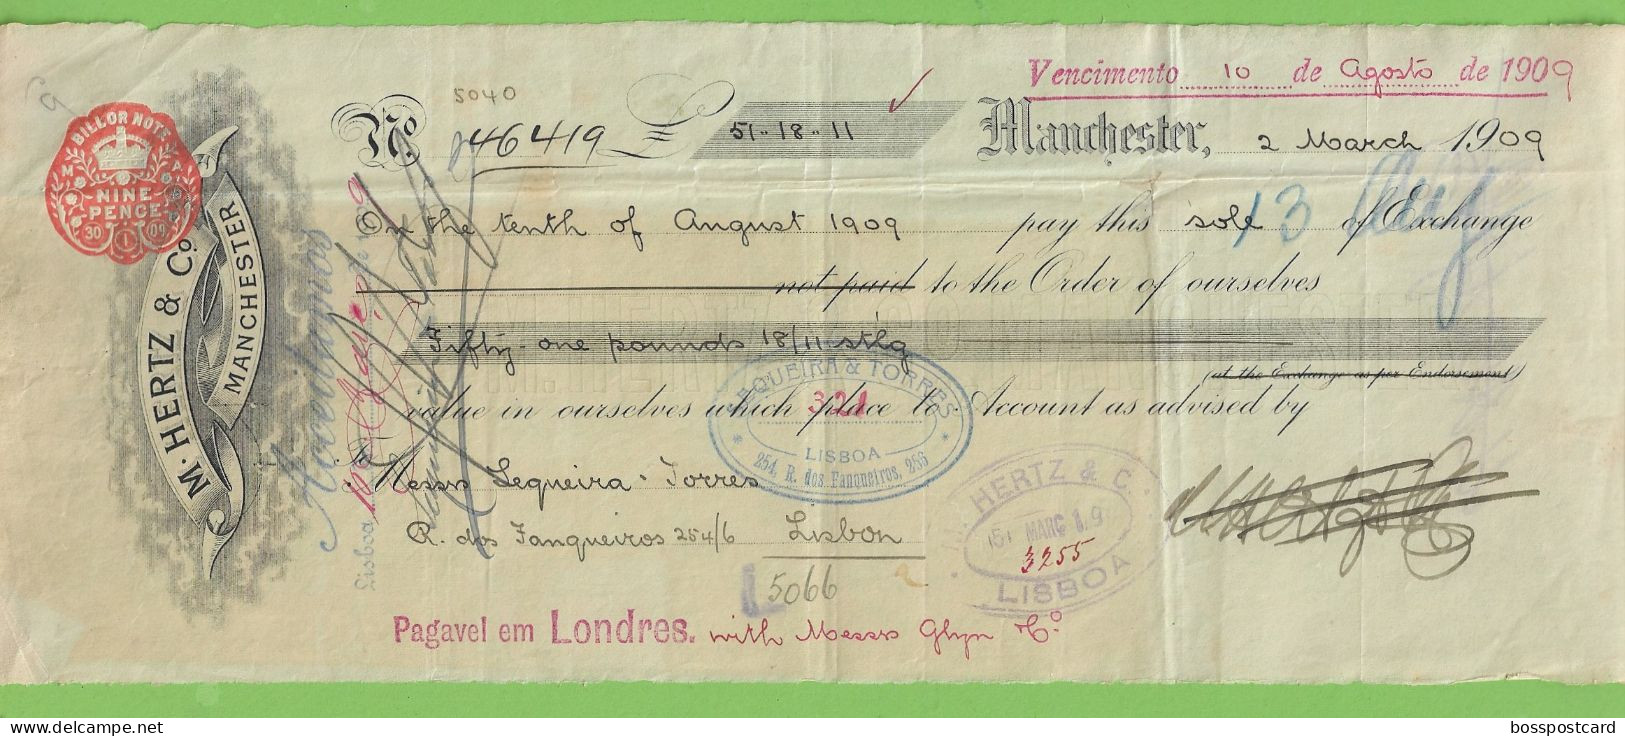 Manchester - Lettre - Bank - Lisboa - Portugal - England - Cheques & Traveler's Cheques